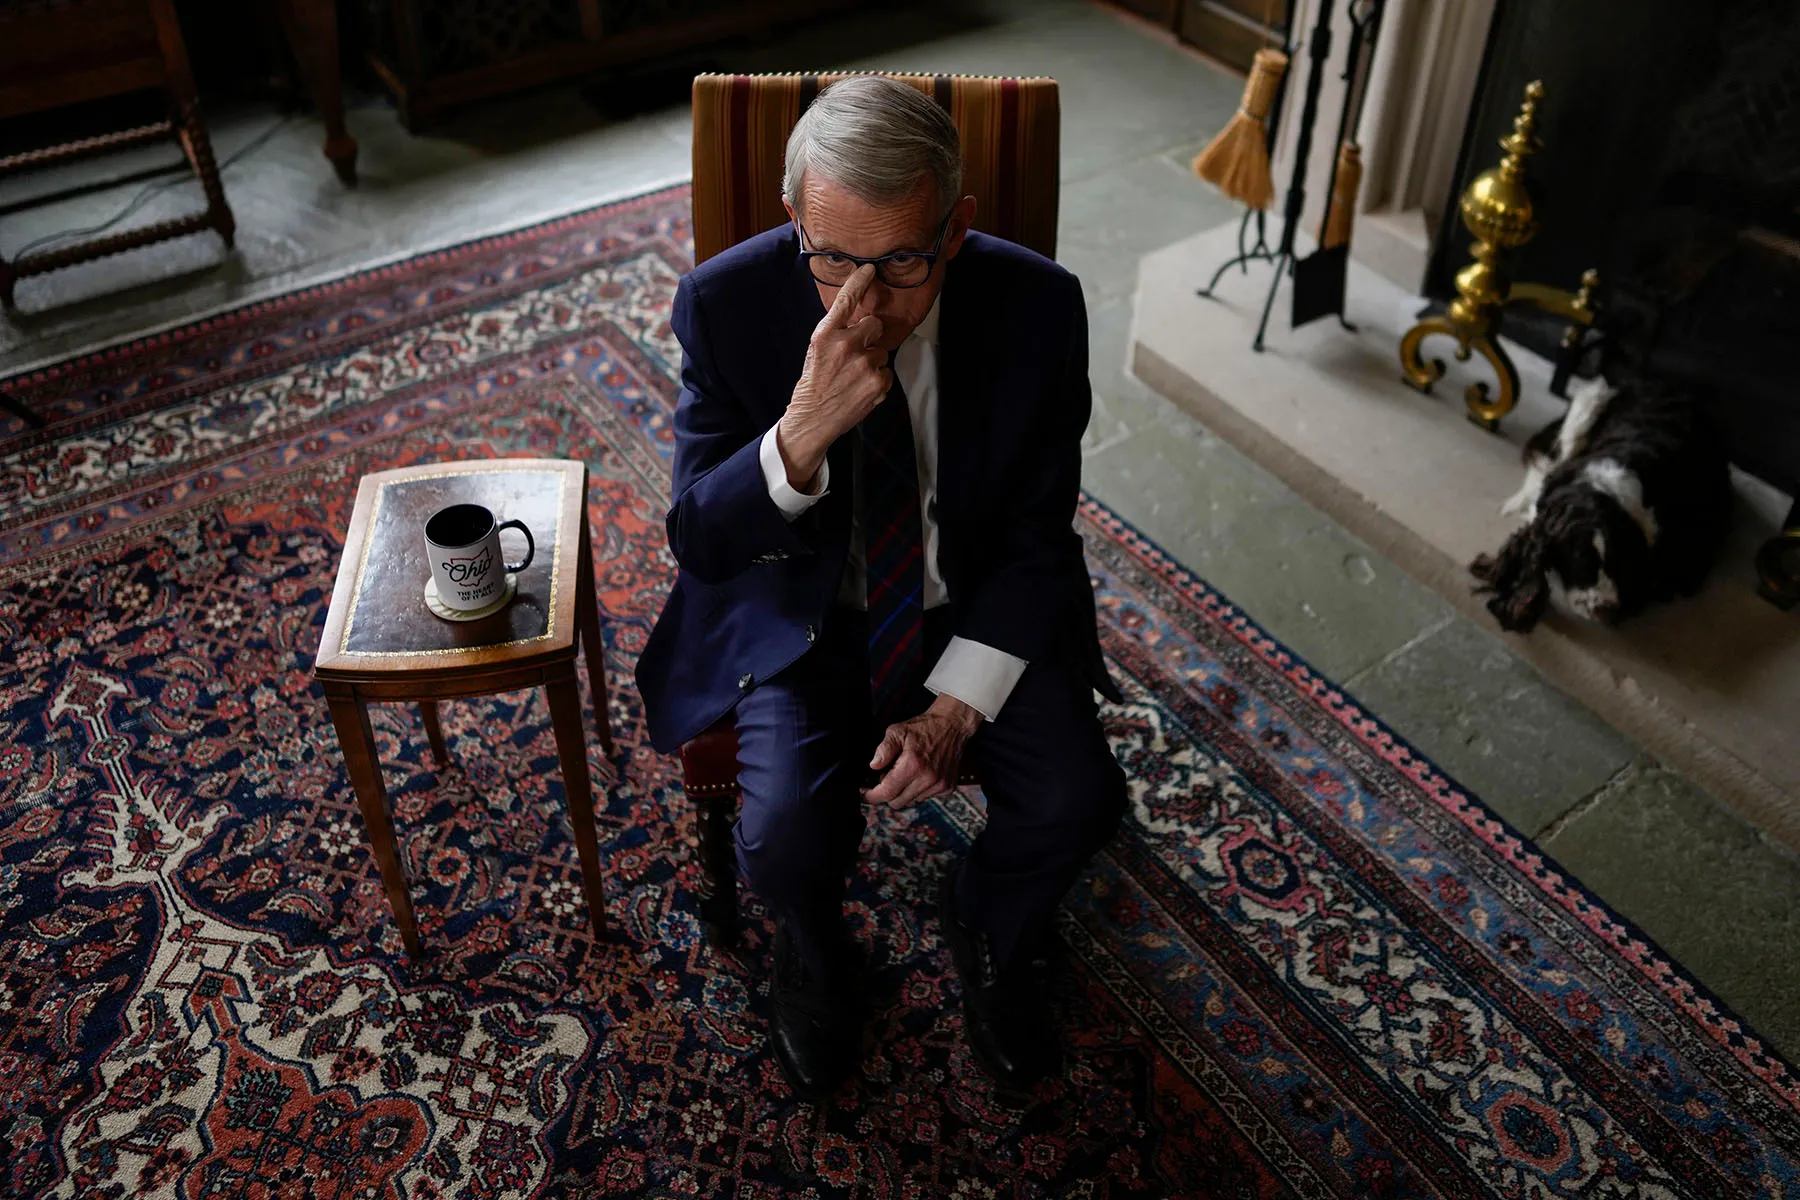 Ohio Gov. Mike DeWine pushes his glasses up on his nose as during an interview with at the Ohio Governor's Residence.